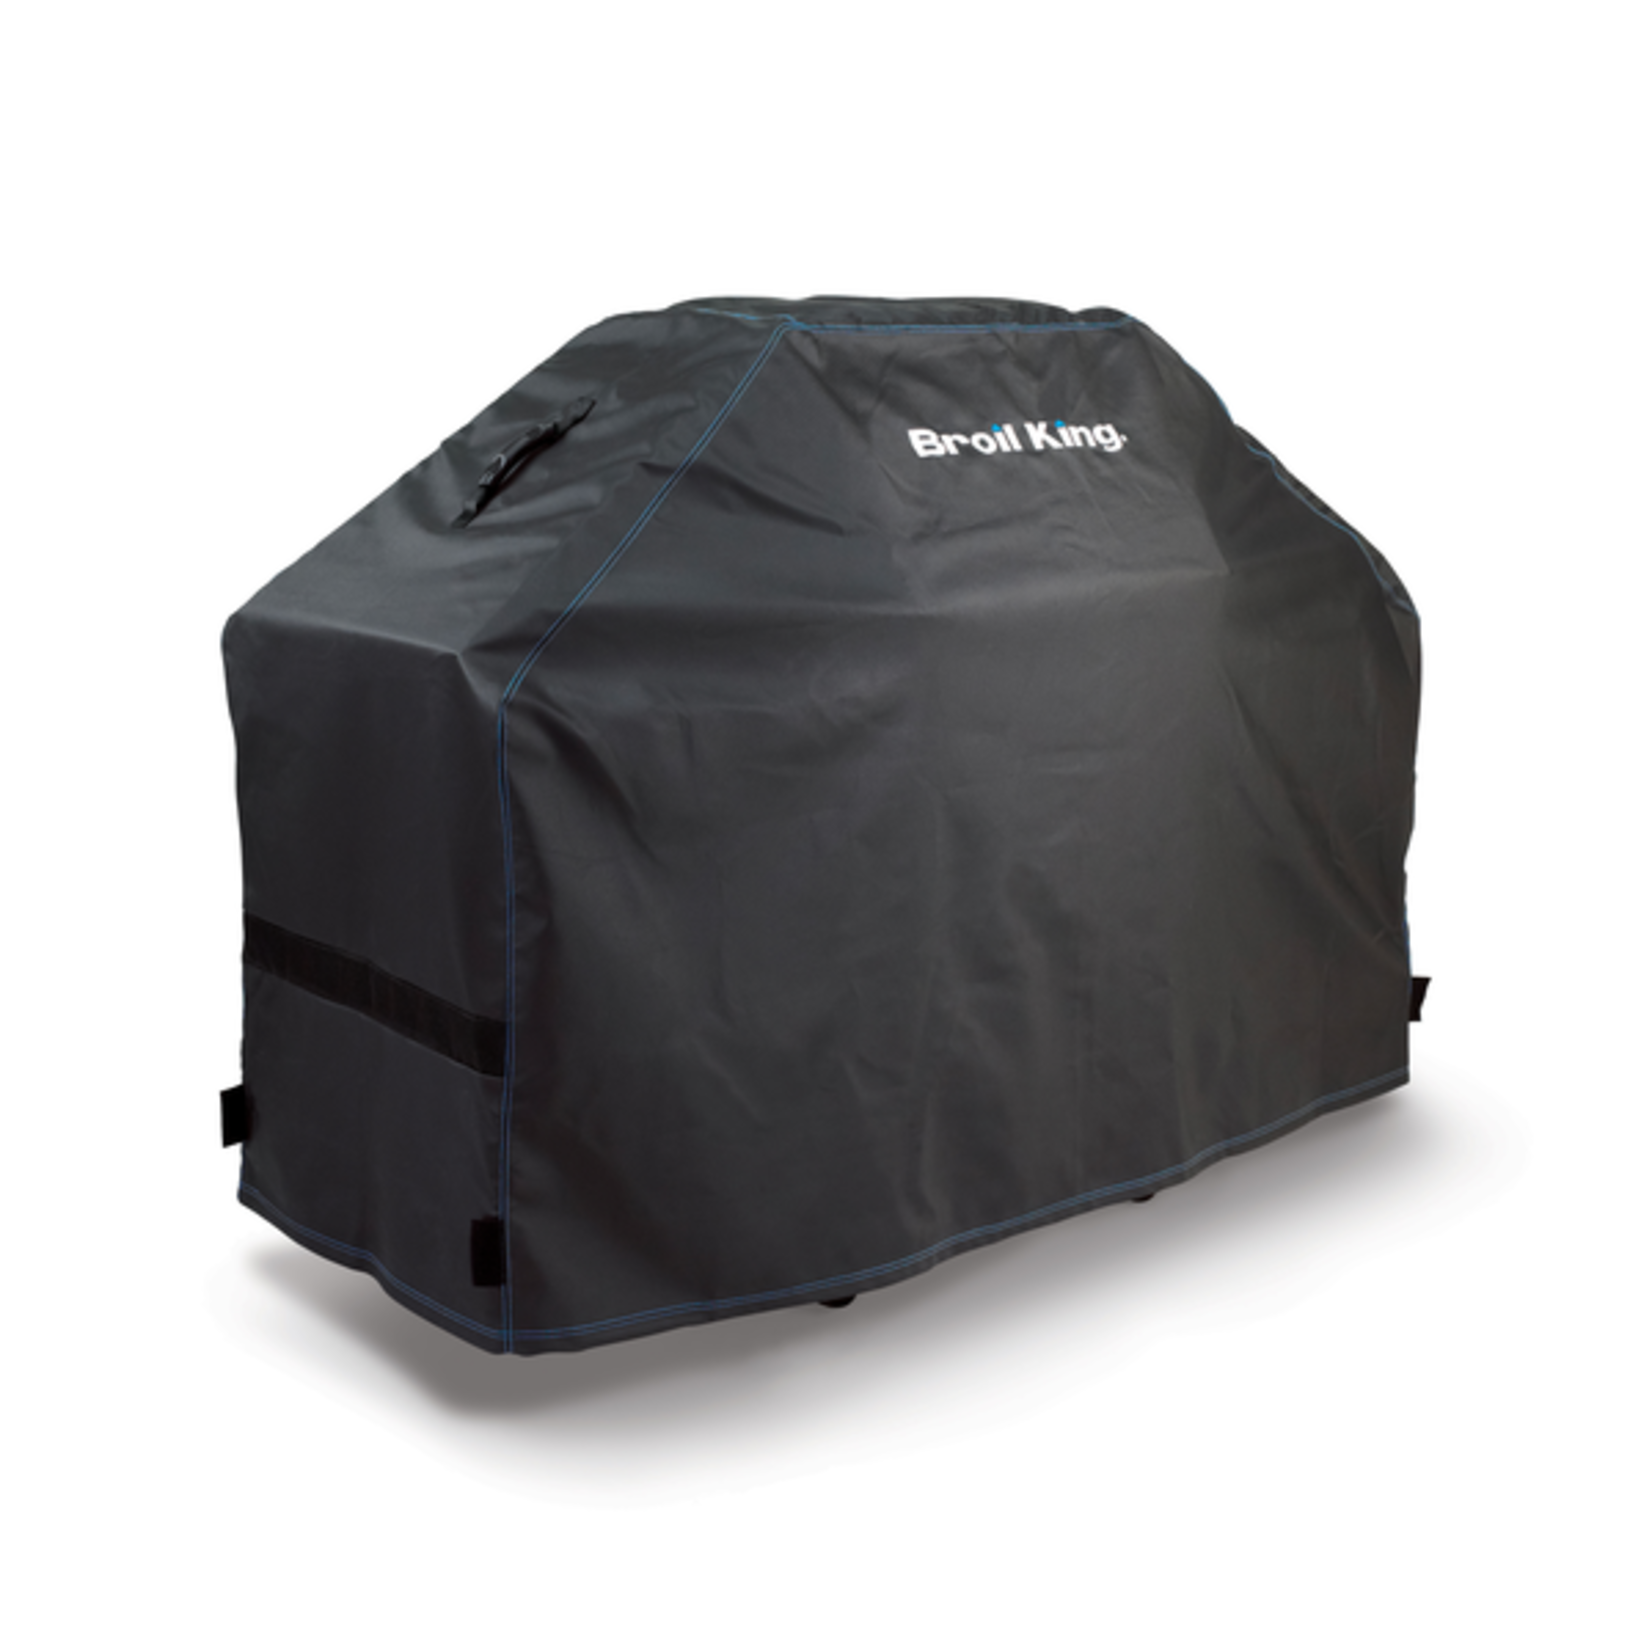 Broil King Grill Cover - Premium - Signet/Sovereign/Crown/Baron 400 Series